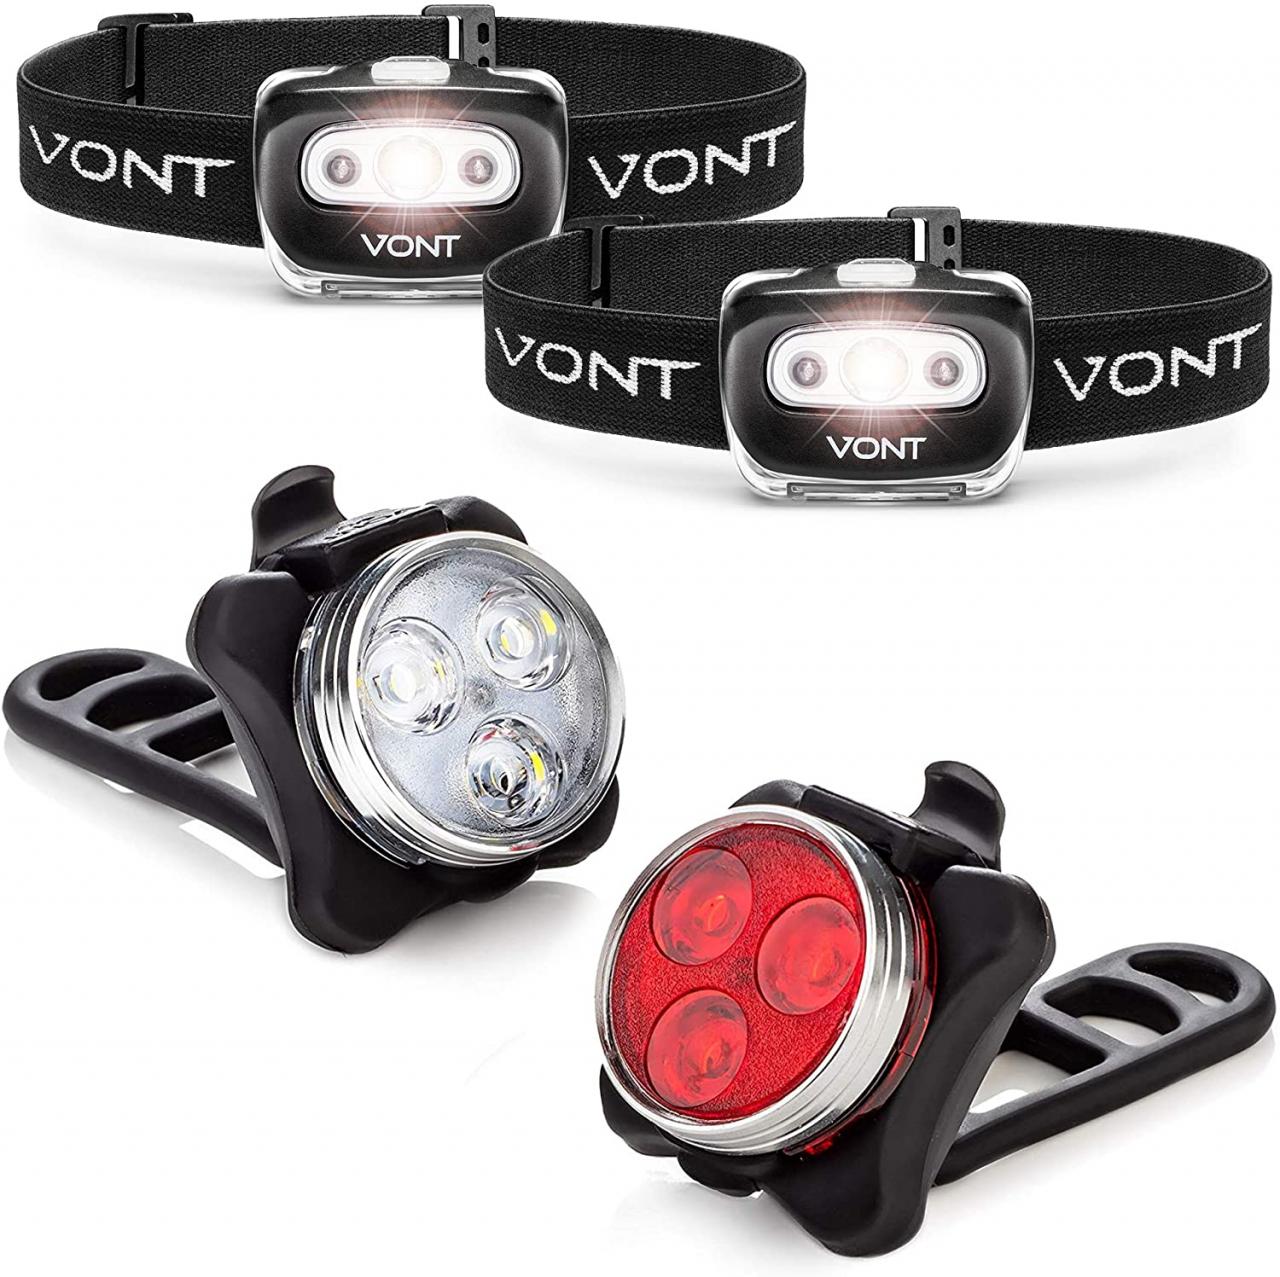 Vont 'Pyro' Bike Light Set, USB Rechargeable, Super Bright Bicycle Light, Bike  Lights Front and Back, Bike Headlight, 2X Longer Battery Life, Waterproof,  4 Modes (2 Cables, 4 Straps) : Amazon.ae: Sporting Goods